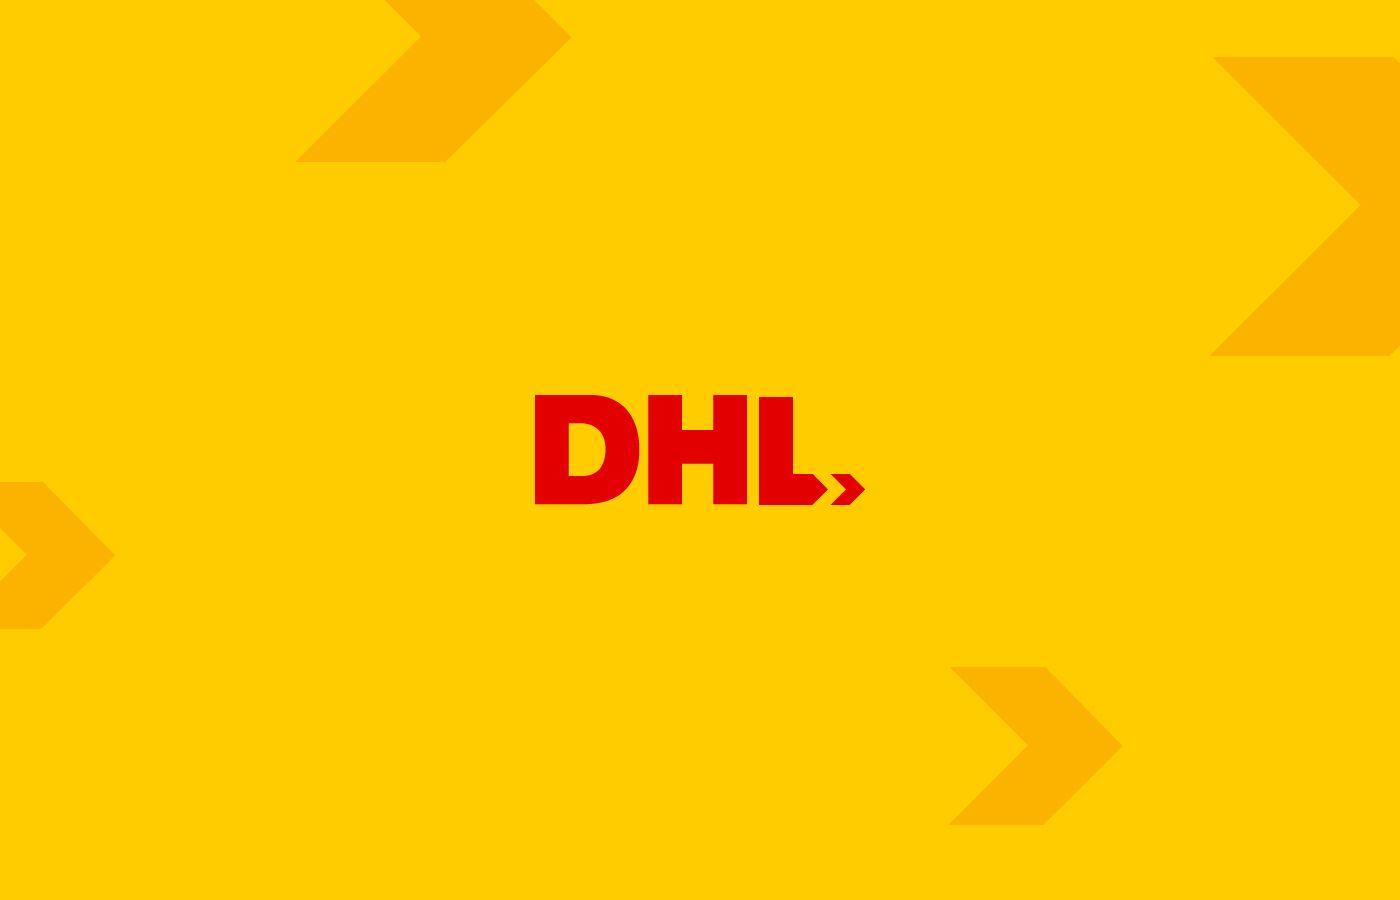 DHL New Logo - DHL redesign / Personal on Behance